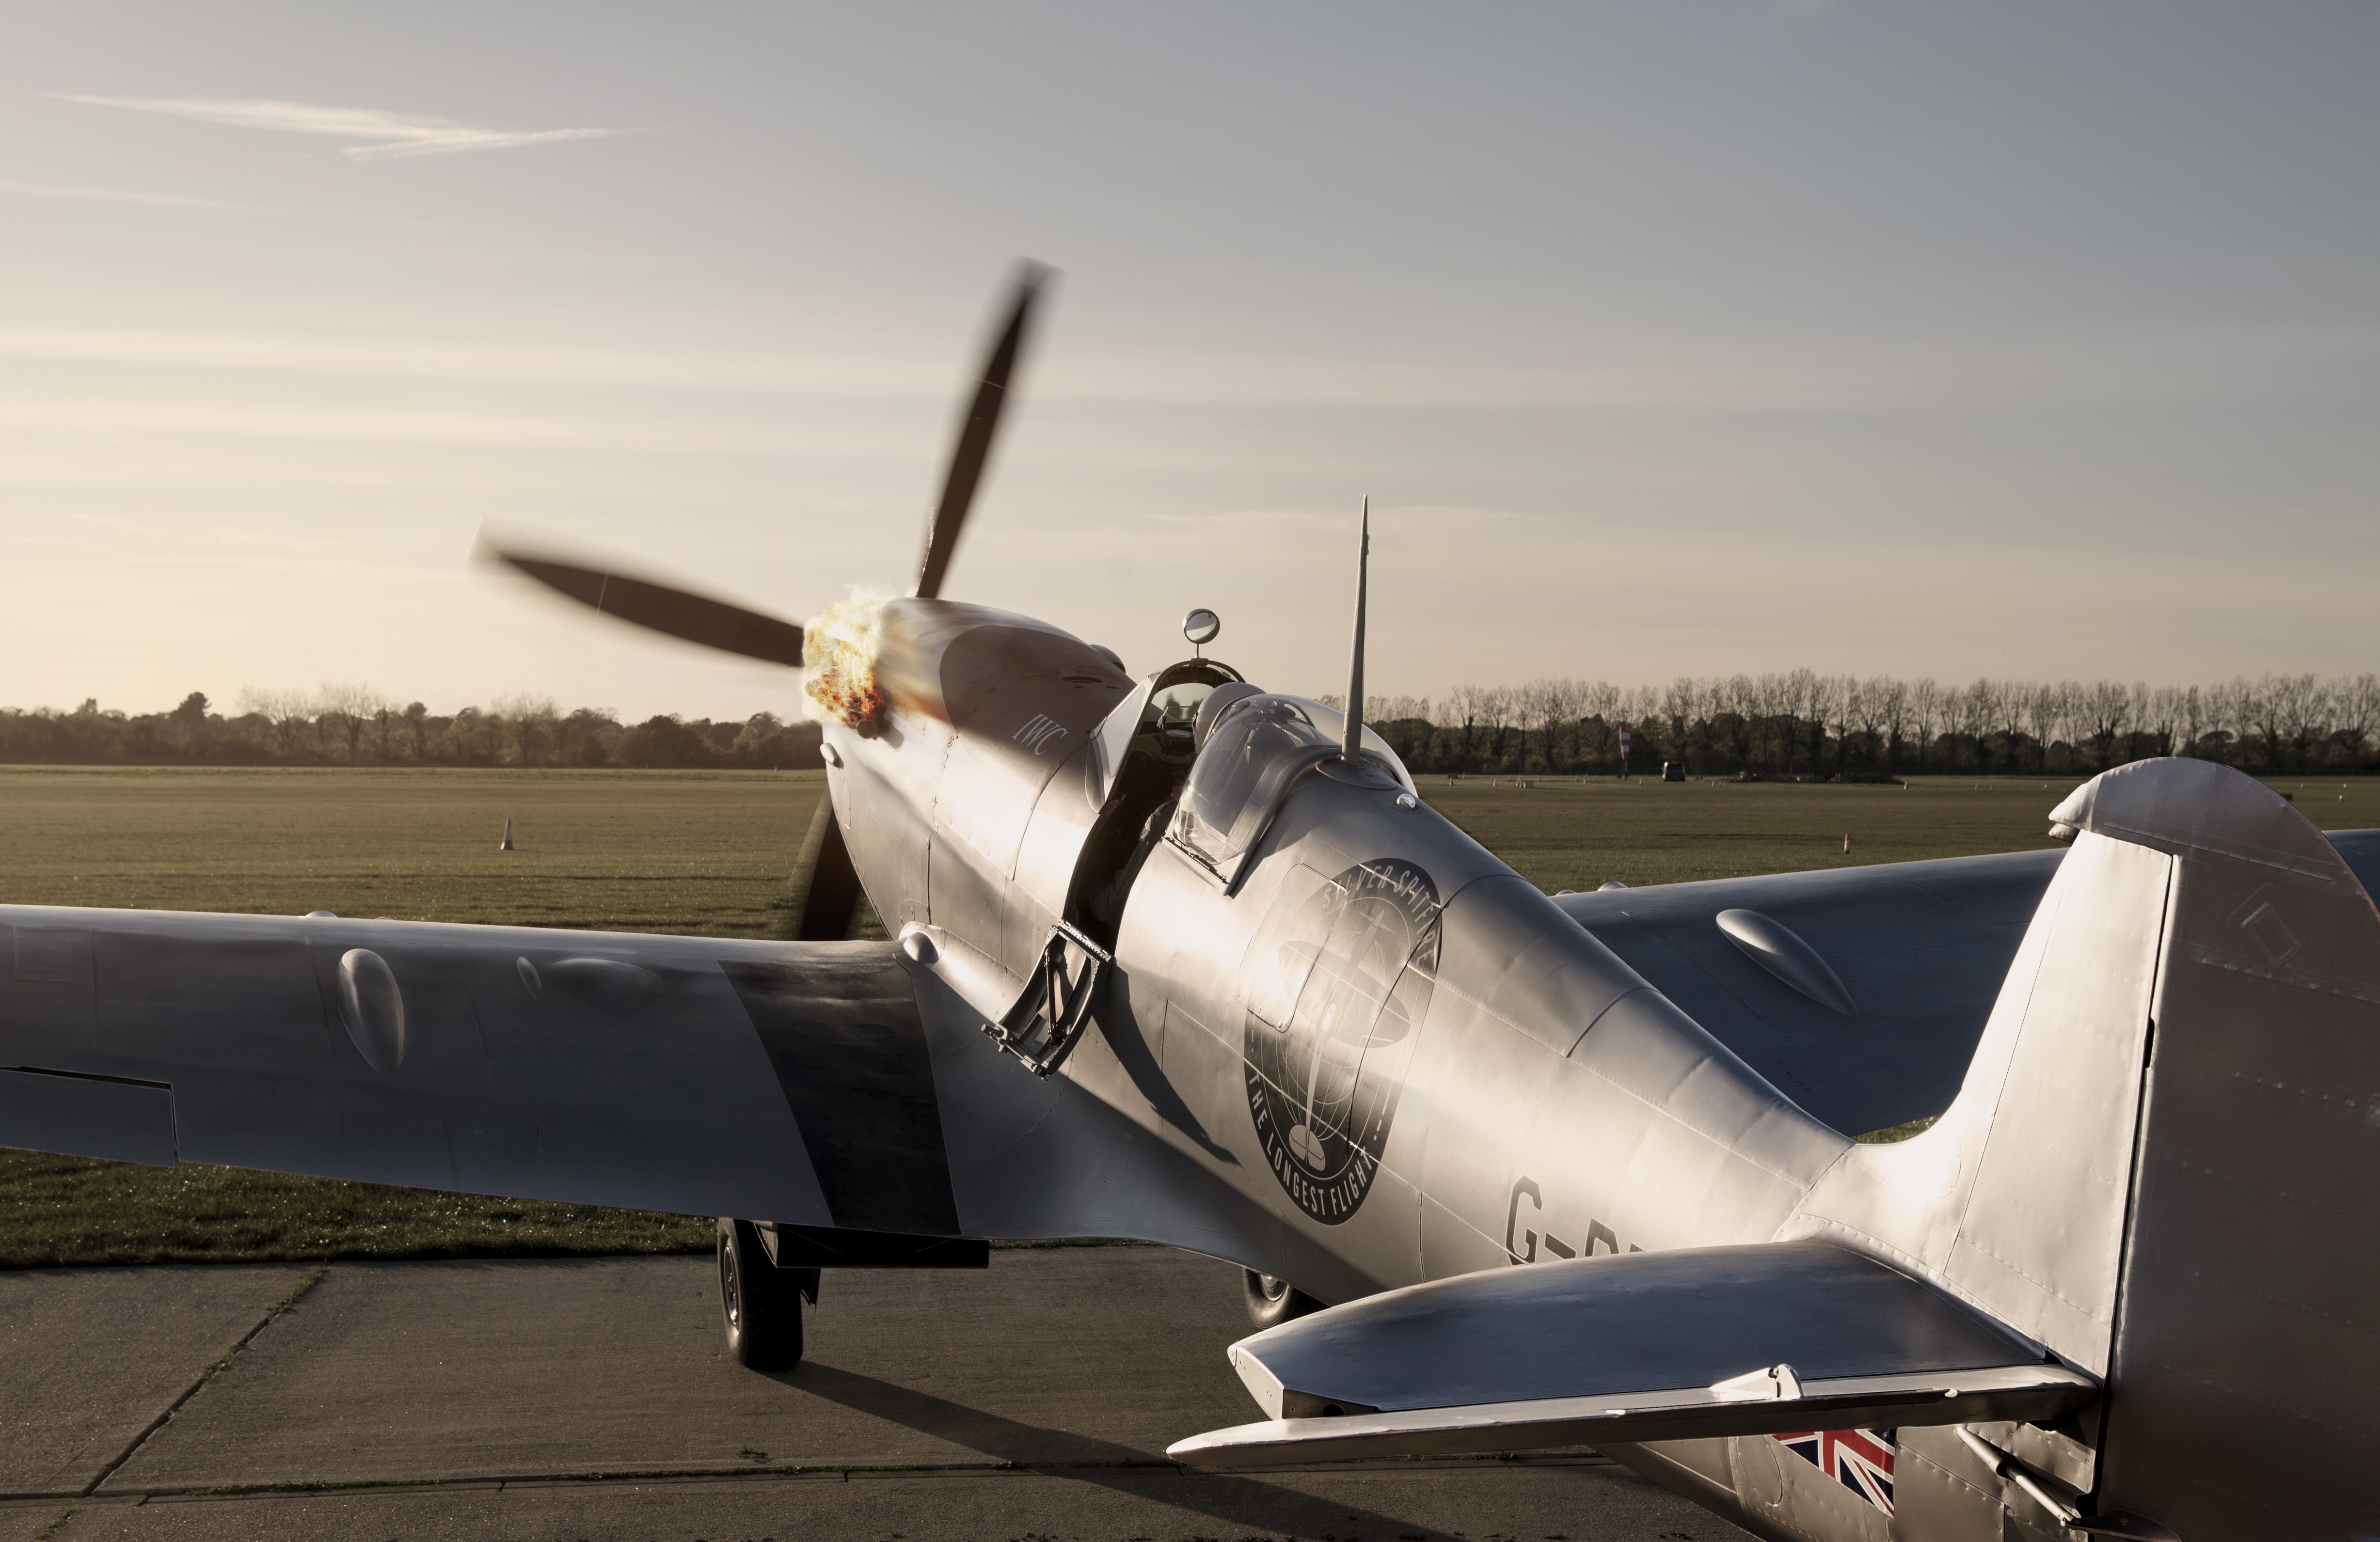 IWC's Spitfire collection draws inspiration from the iconic fighter plane.